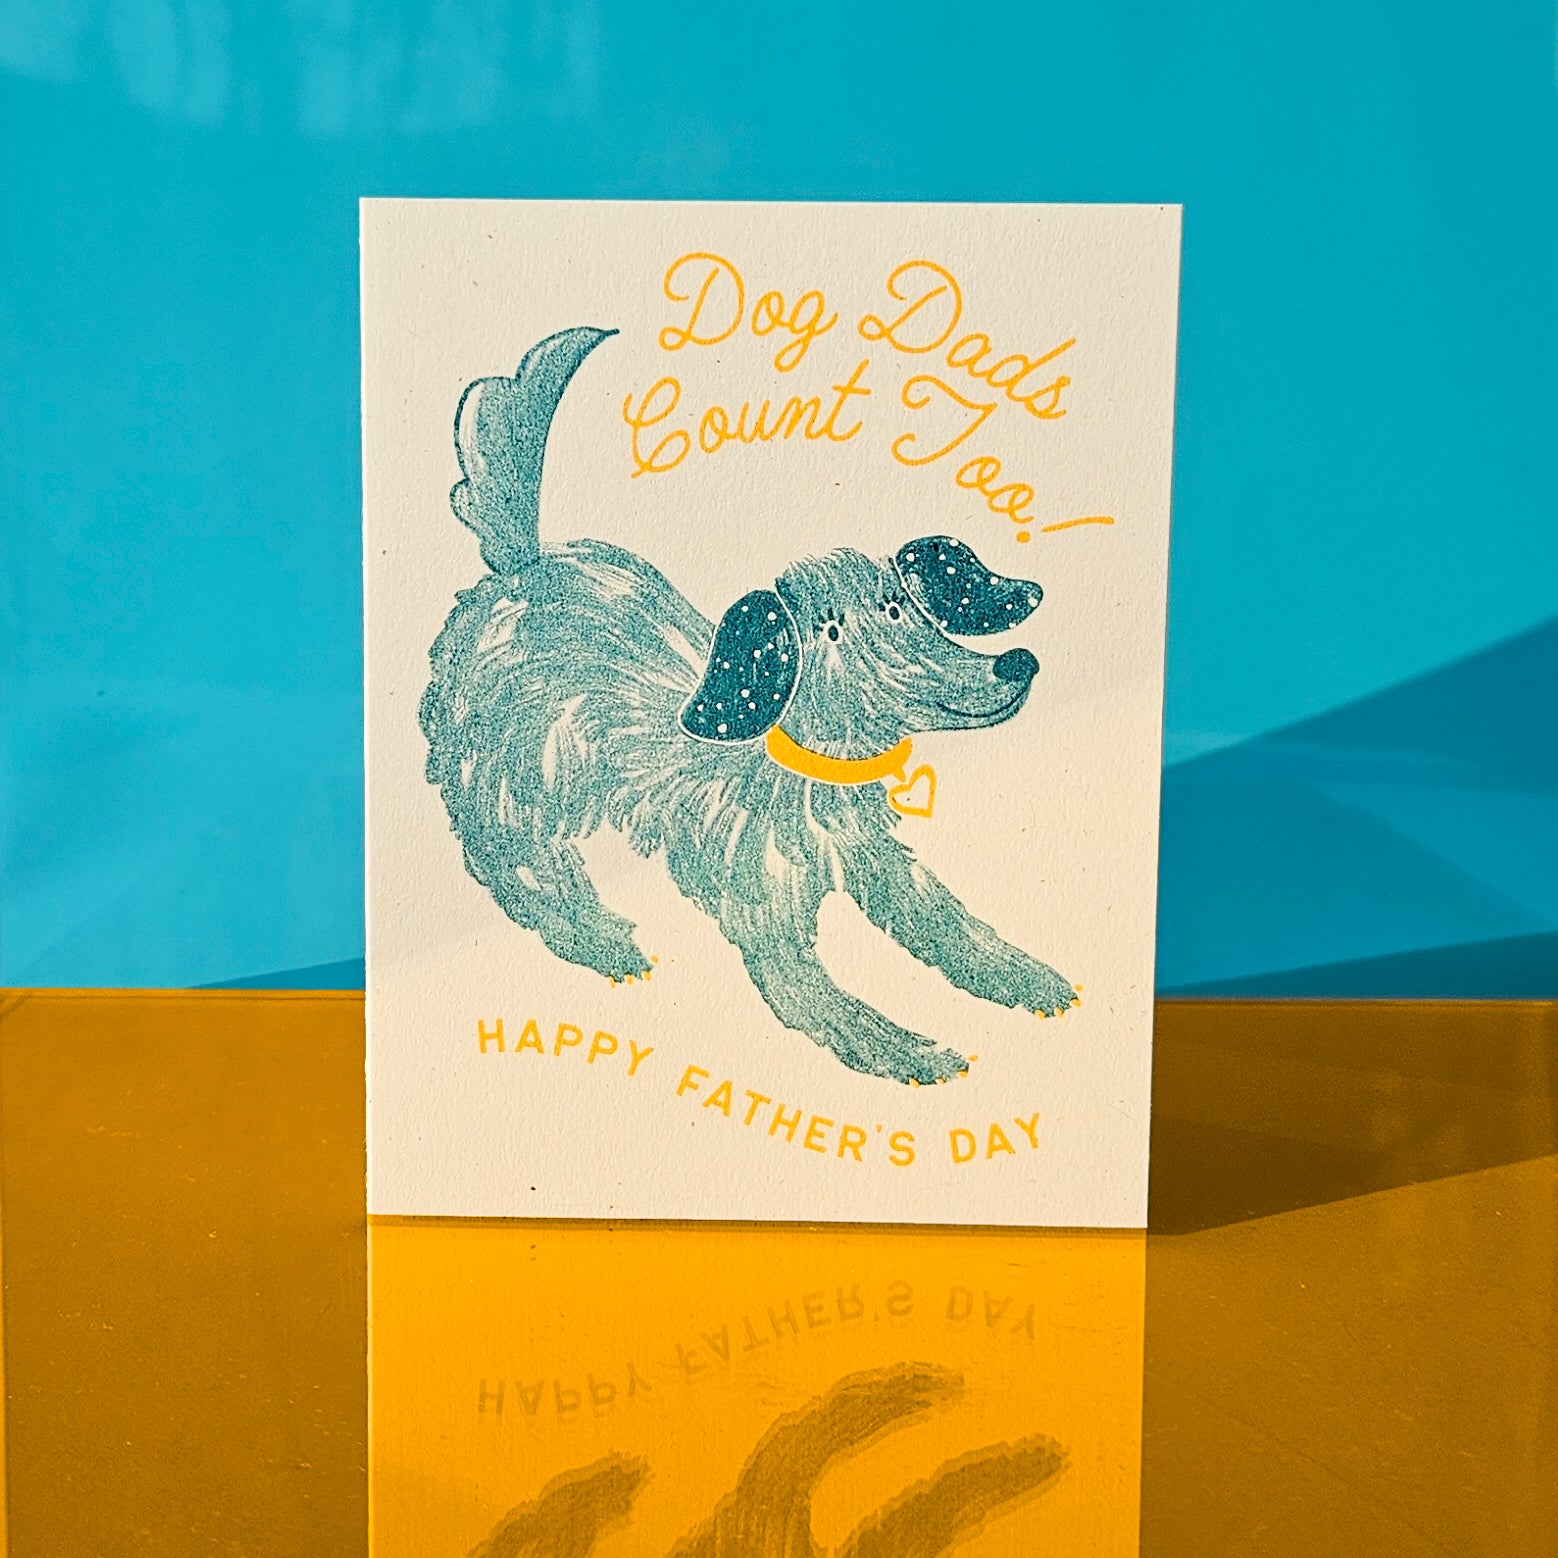 Dog Dads Count Too - Risograph Father's Day Card